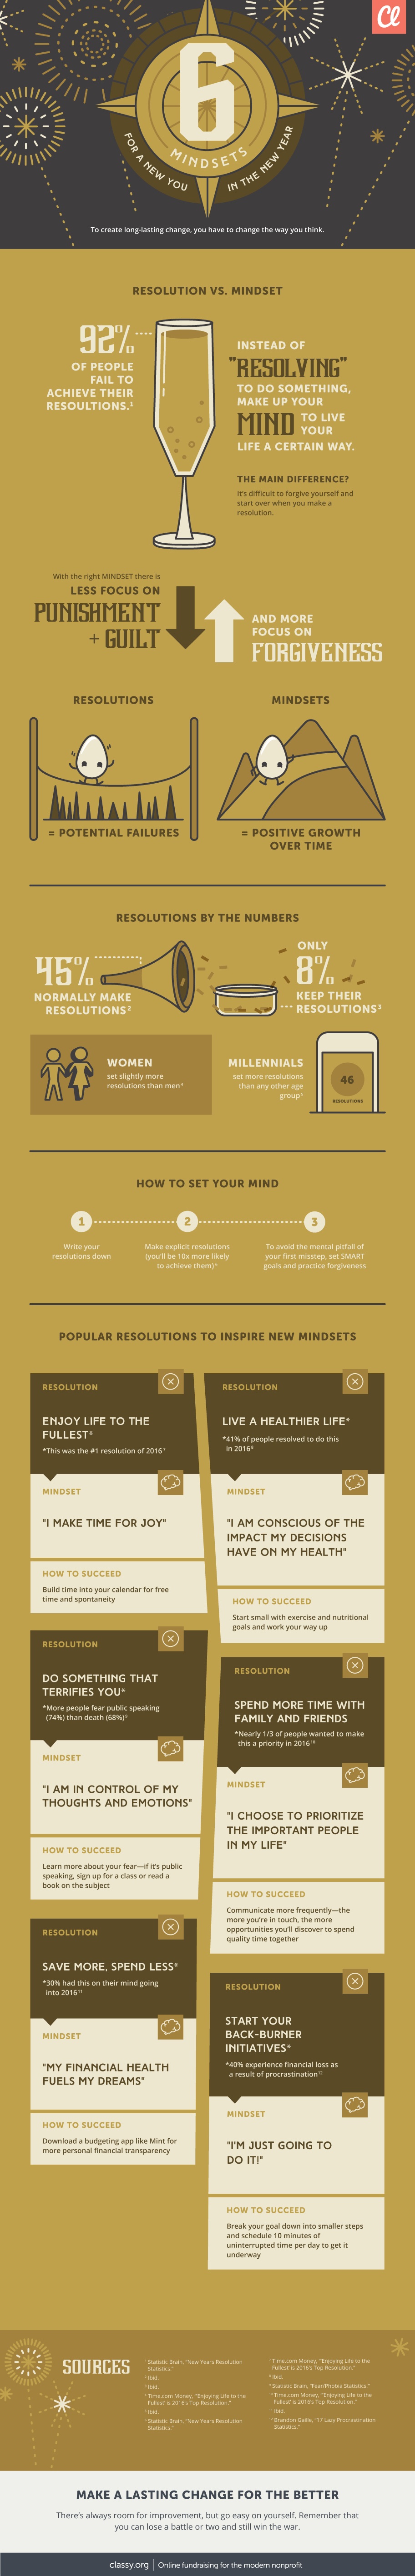 6 Mindsets for a New You in the New Year Infographic